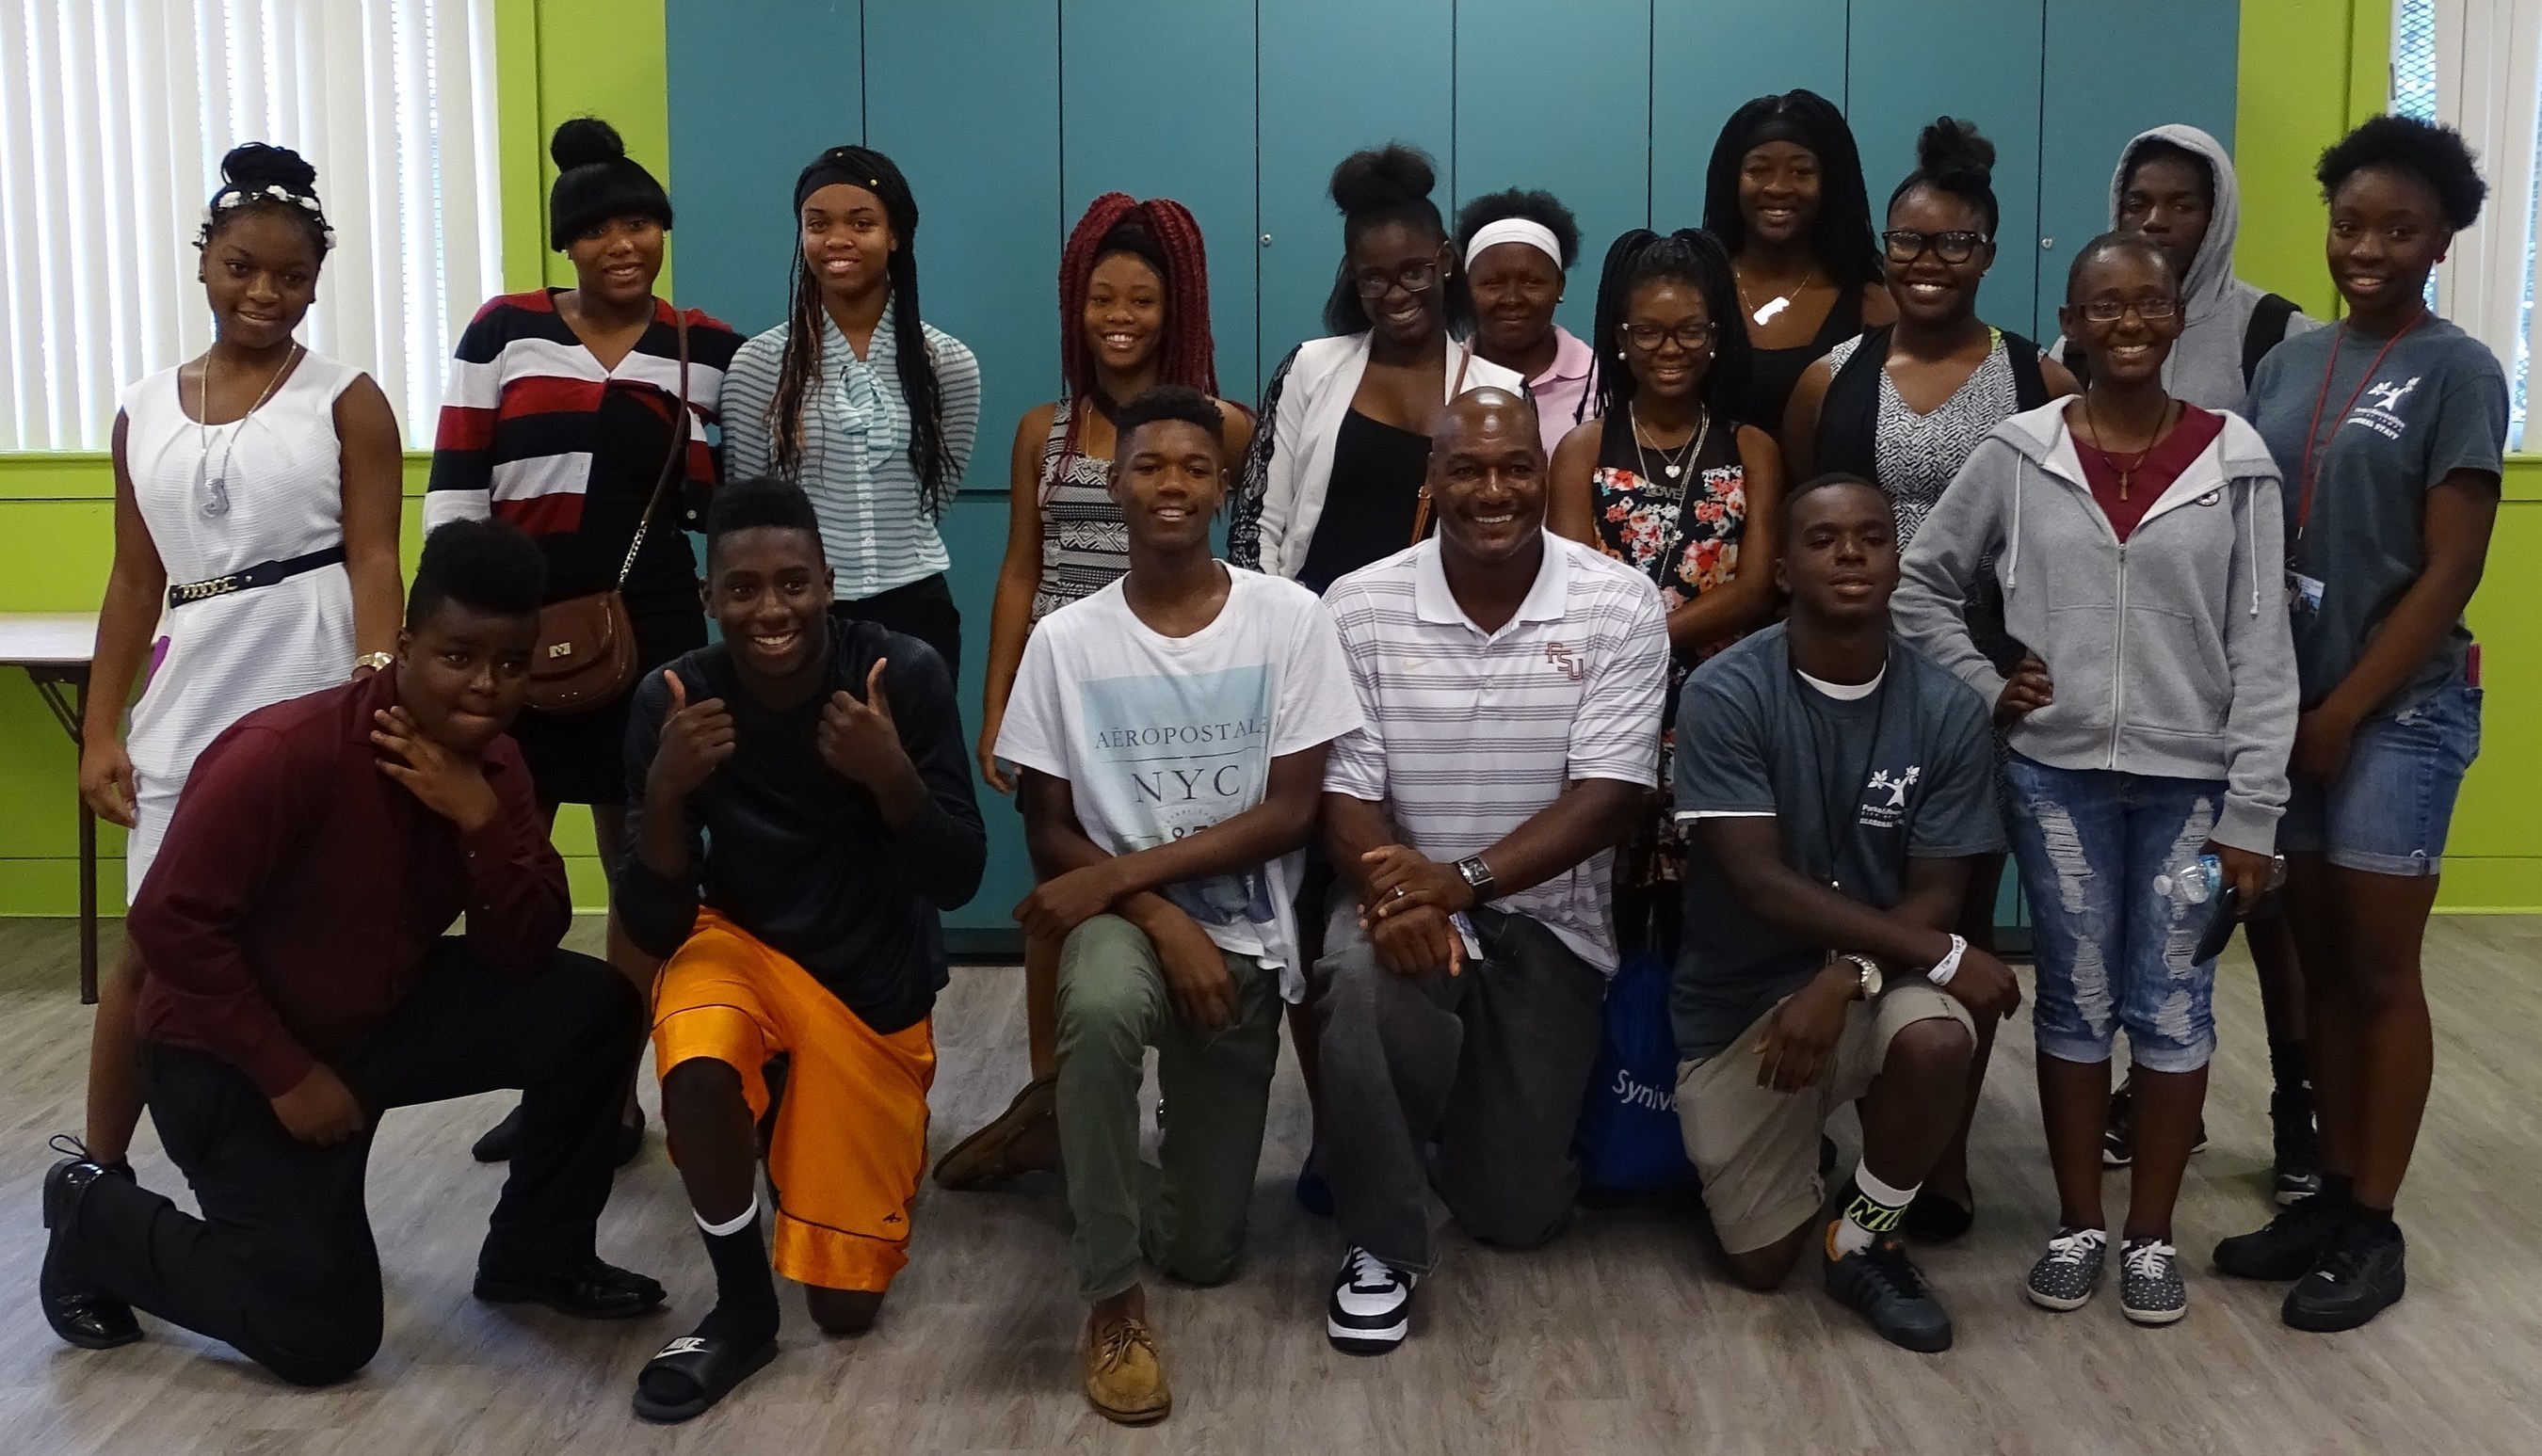 On July 18, Derrick Brooks, former NFL football player and president of Derrick Brooks Charities, Inc., met with teens participating in the Youth Professional Development and Training Program in collaboration with WellCare and the City of Tampa's Parks & Recreation Department.